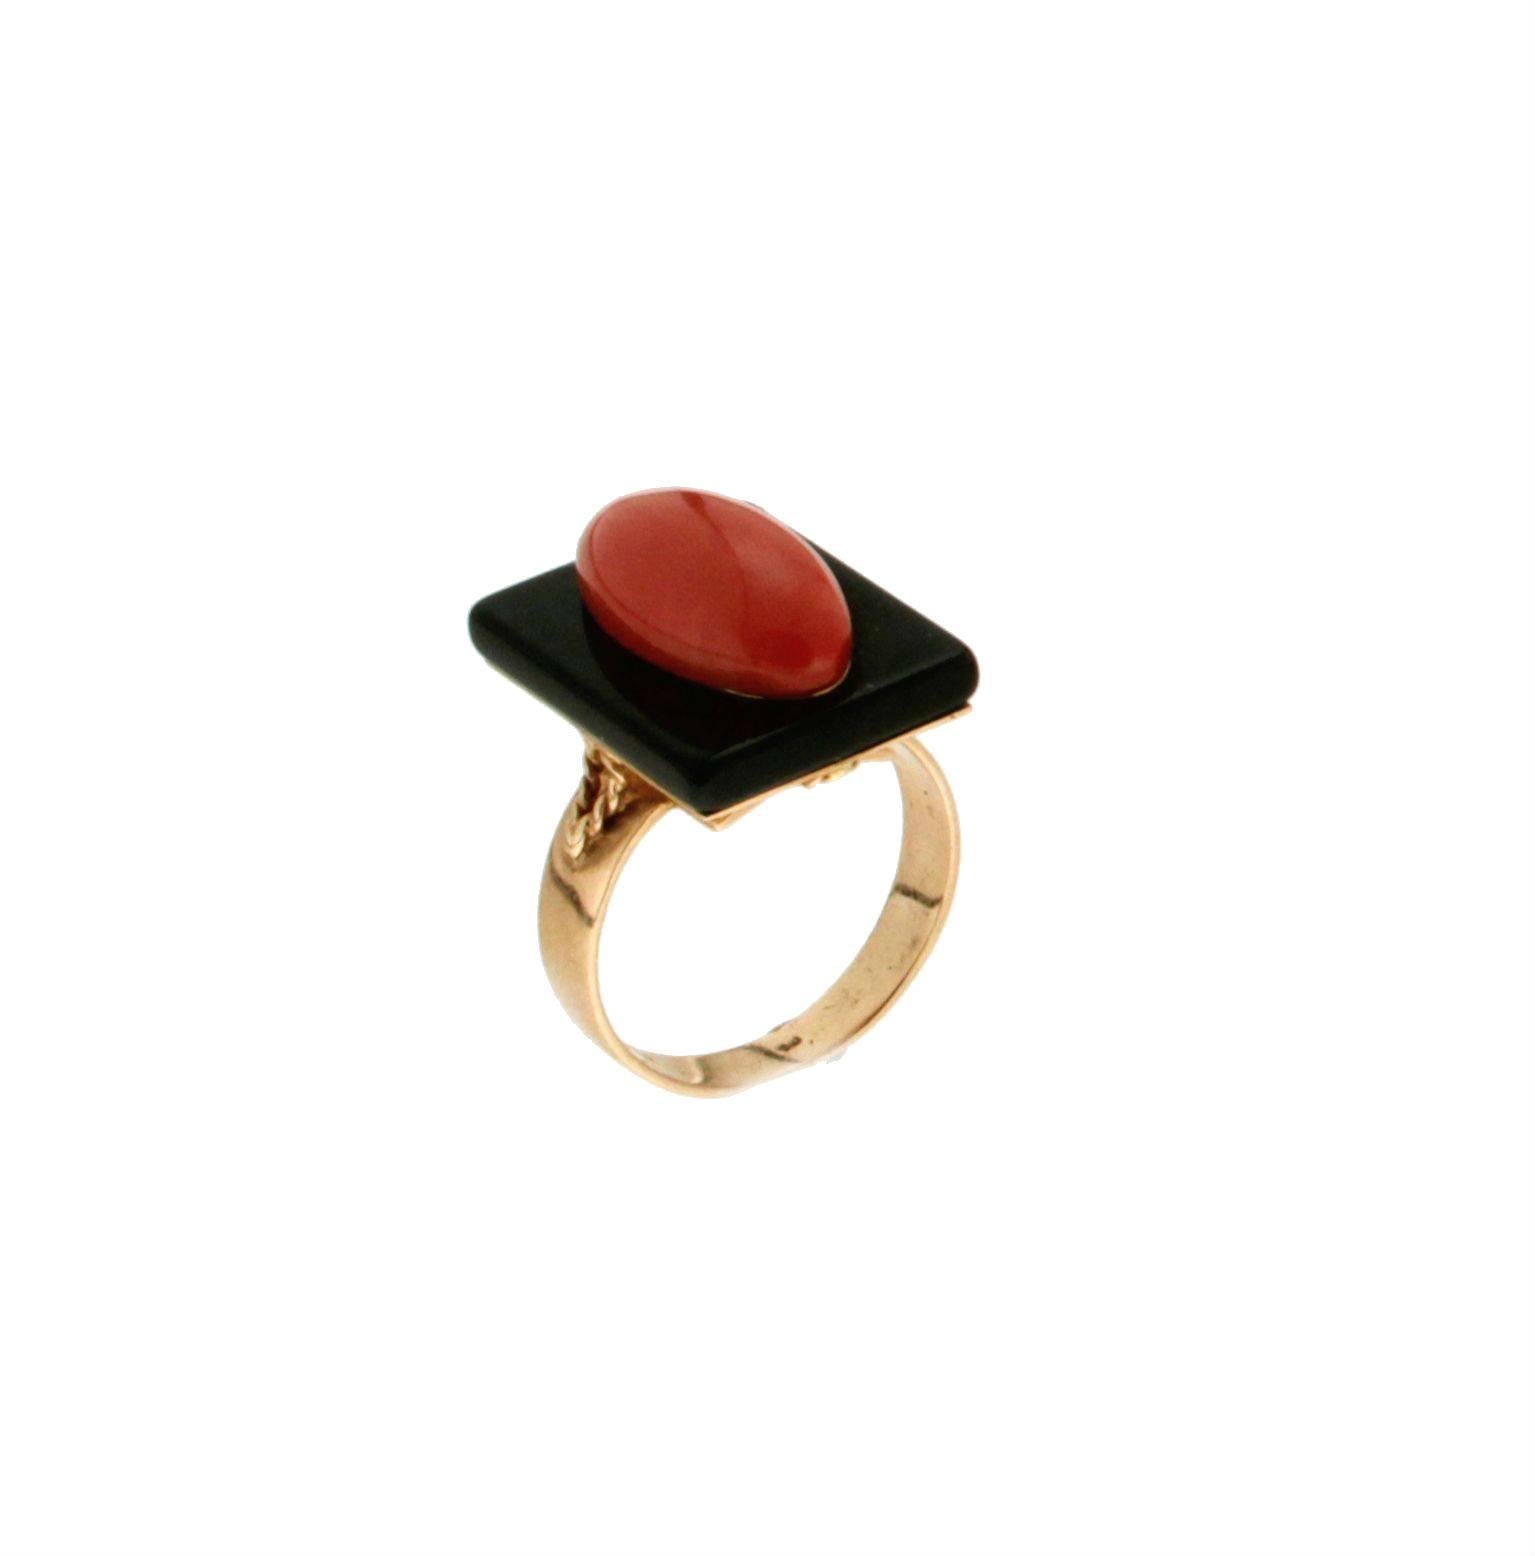 Onyx and natural coral yellow gold 18 karat cocktail ring

Ring weight 7.40 grams
Coral weight 1.50 grams
Ring size 15.40 ITA 7.50 US

